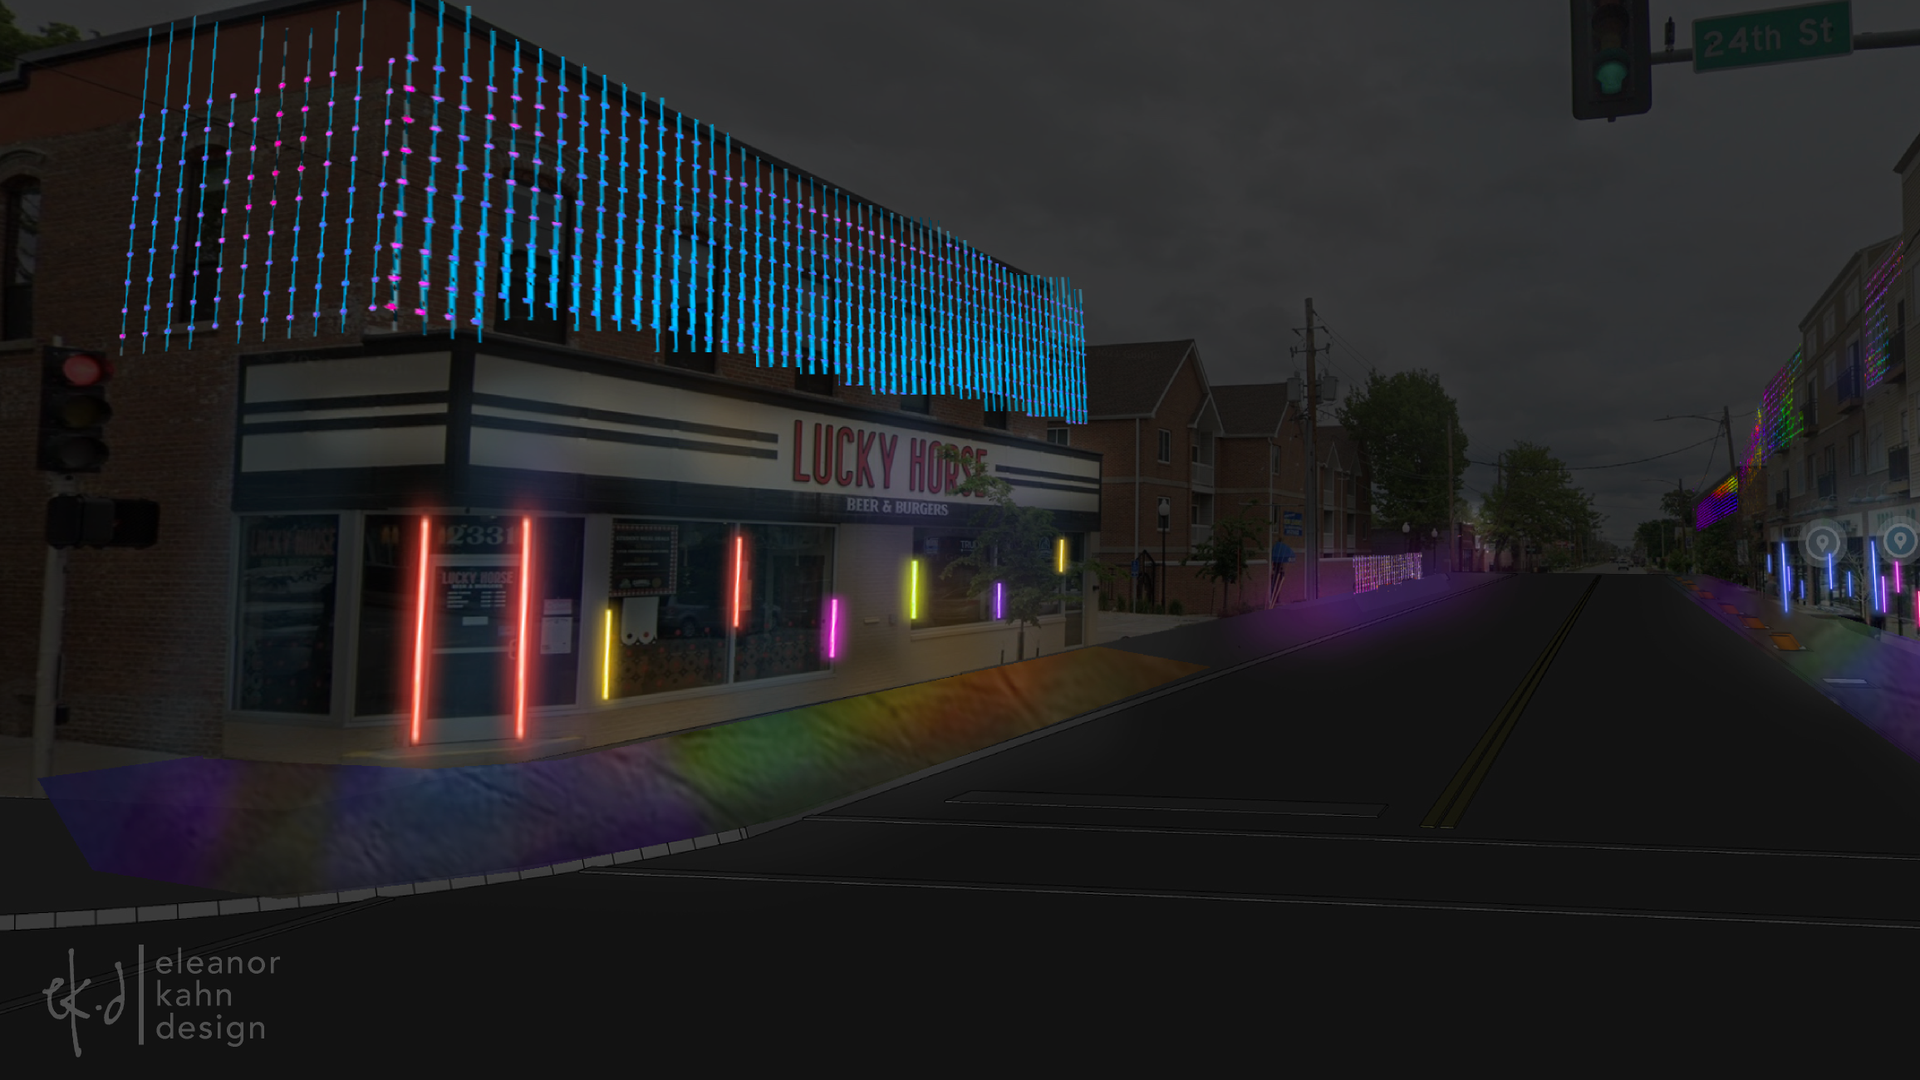 A rendering of blue, yellow, orange and purple lights lighting up a Des Moines business Lucky House.